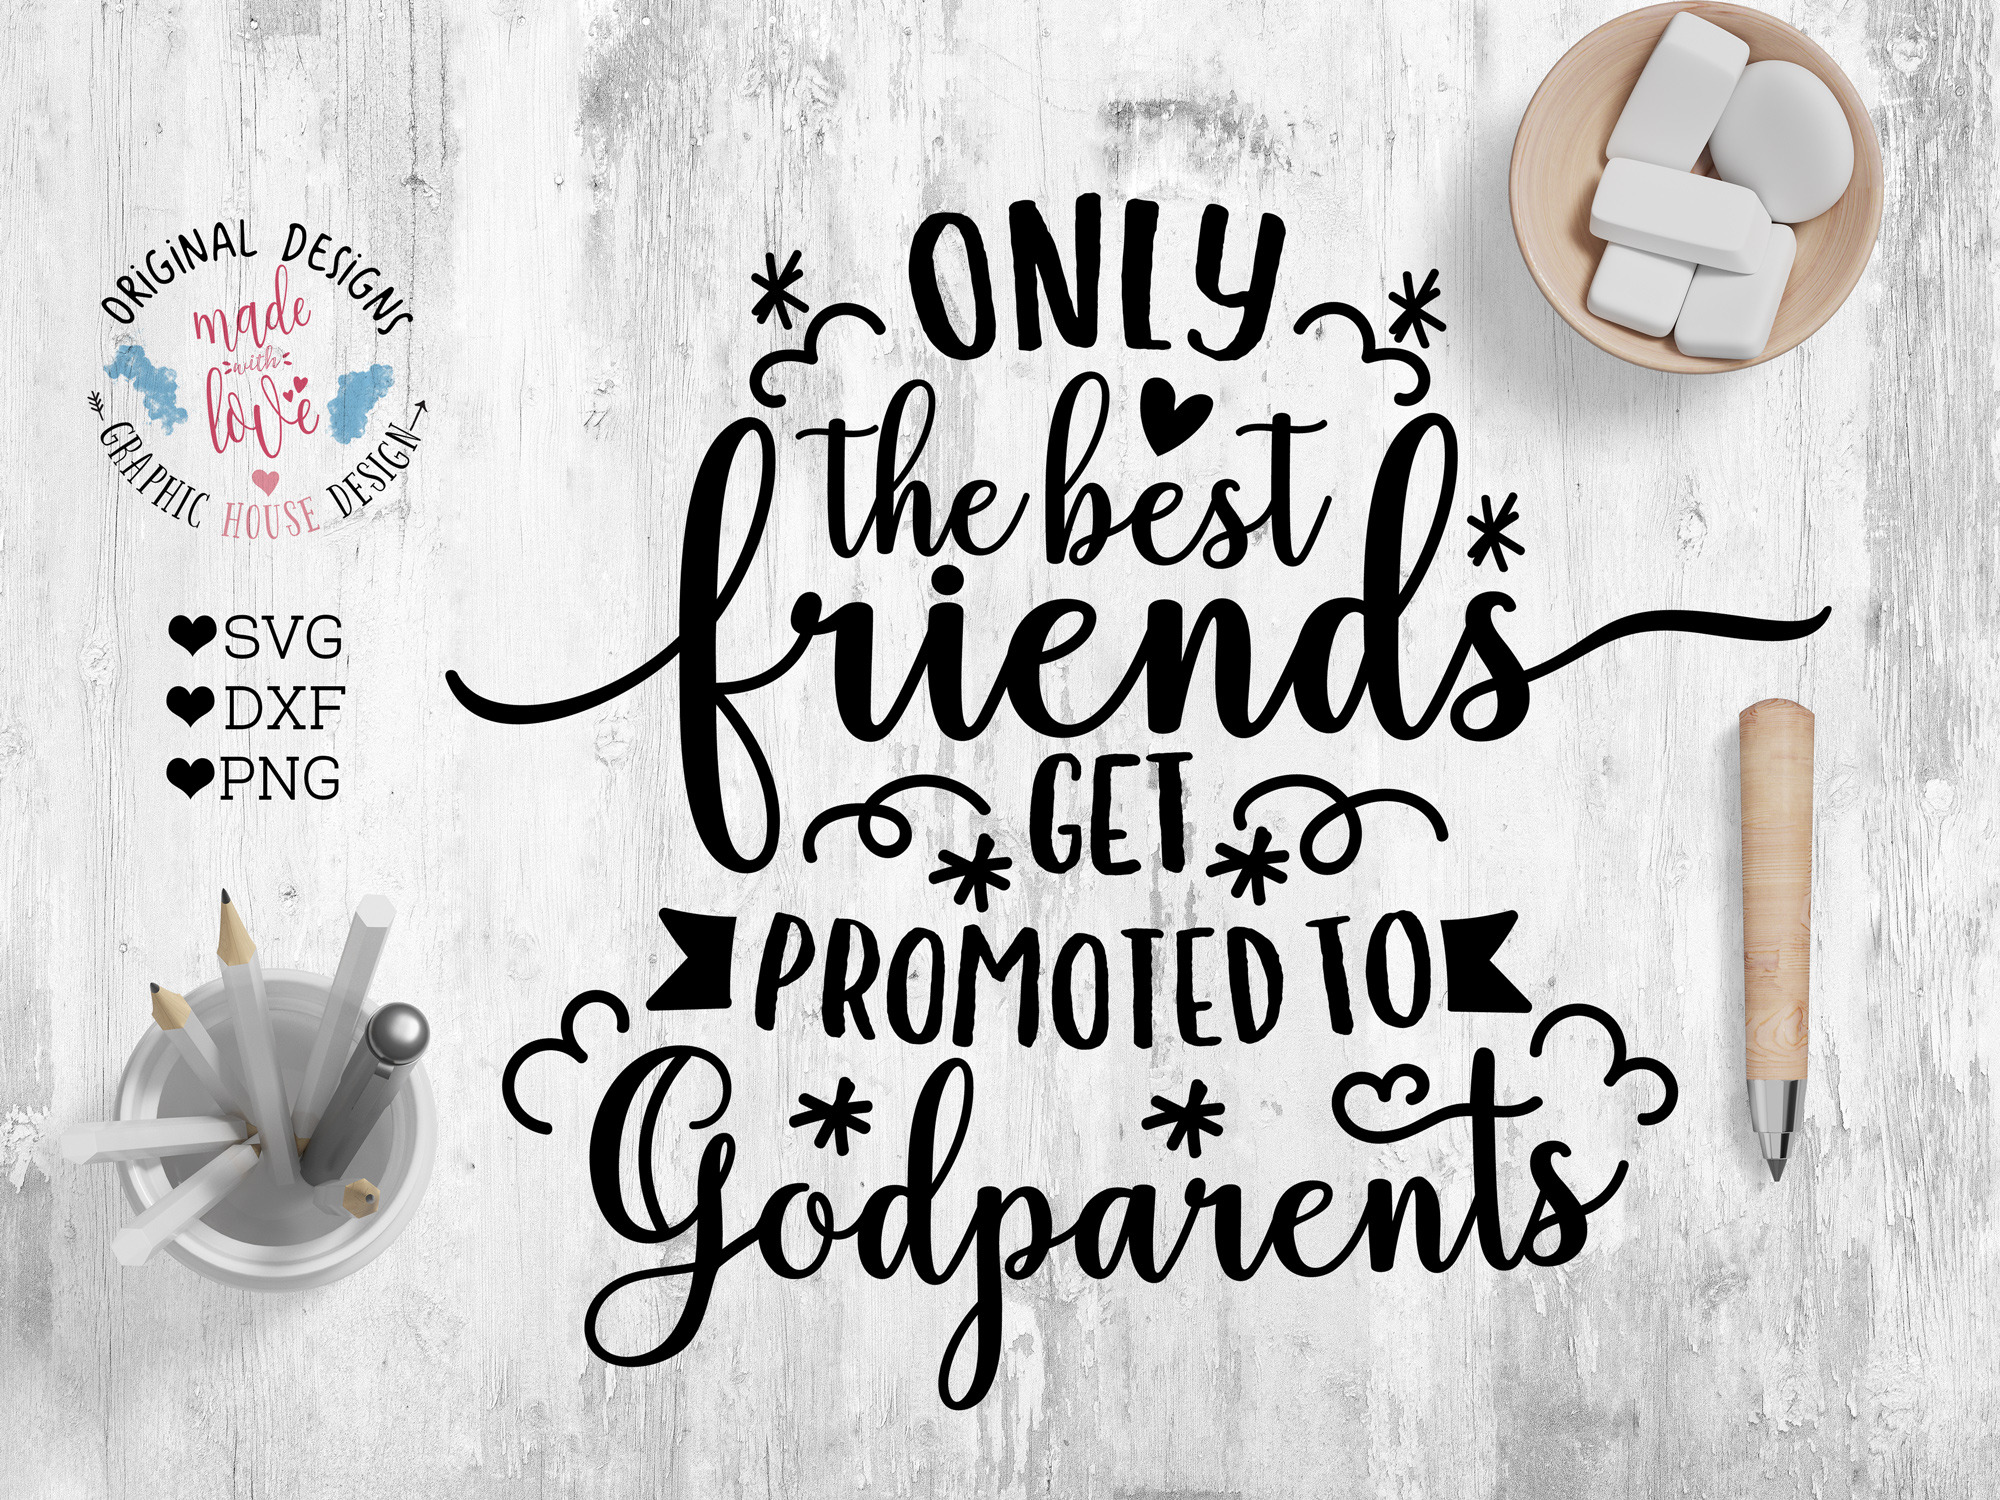 Download Best Friends Promoted to Godparents ~ Illustrations ~ Creative Market